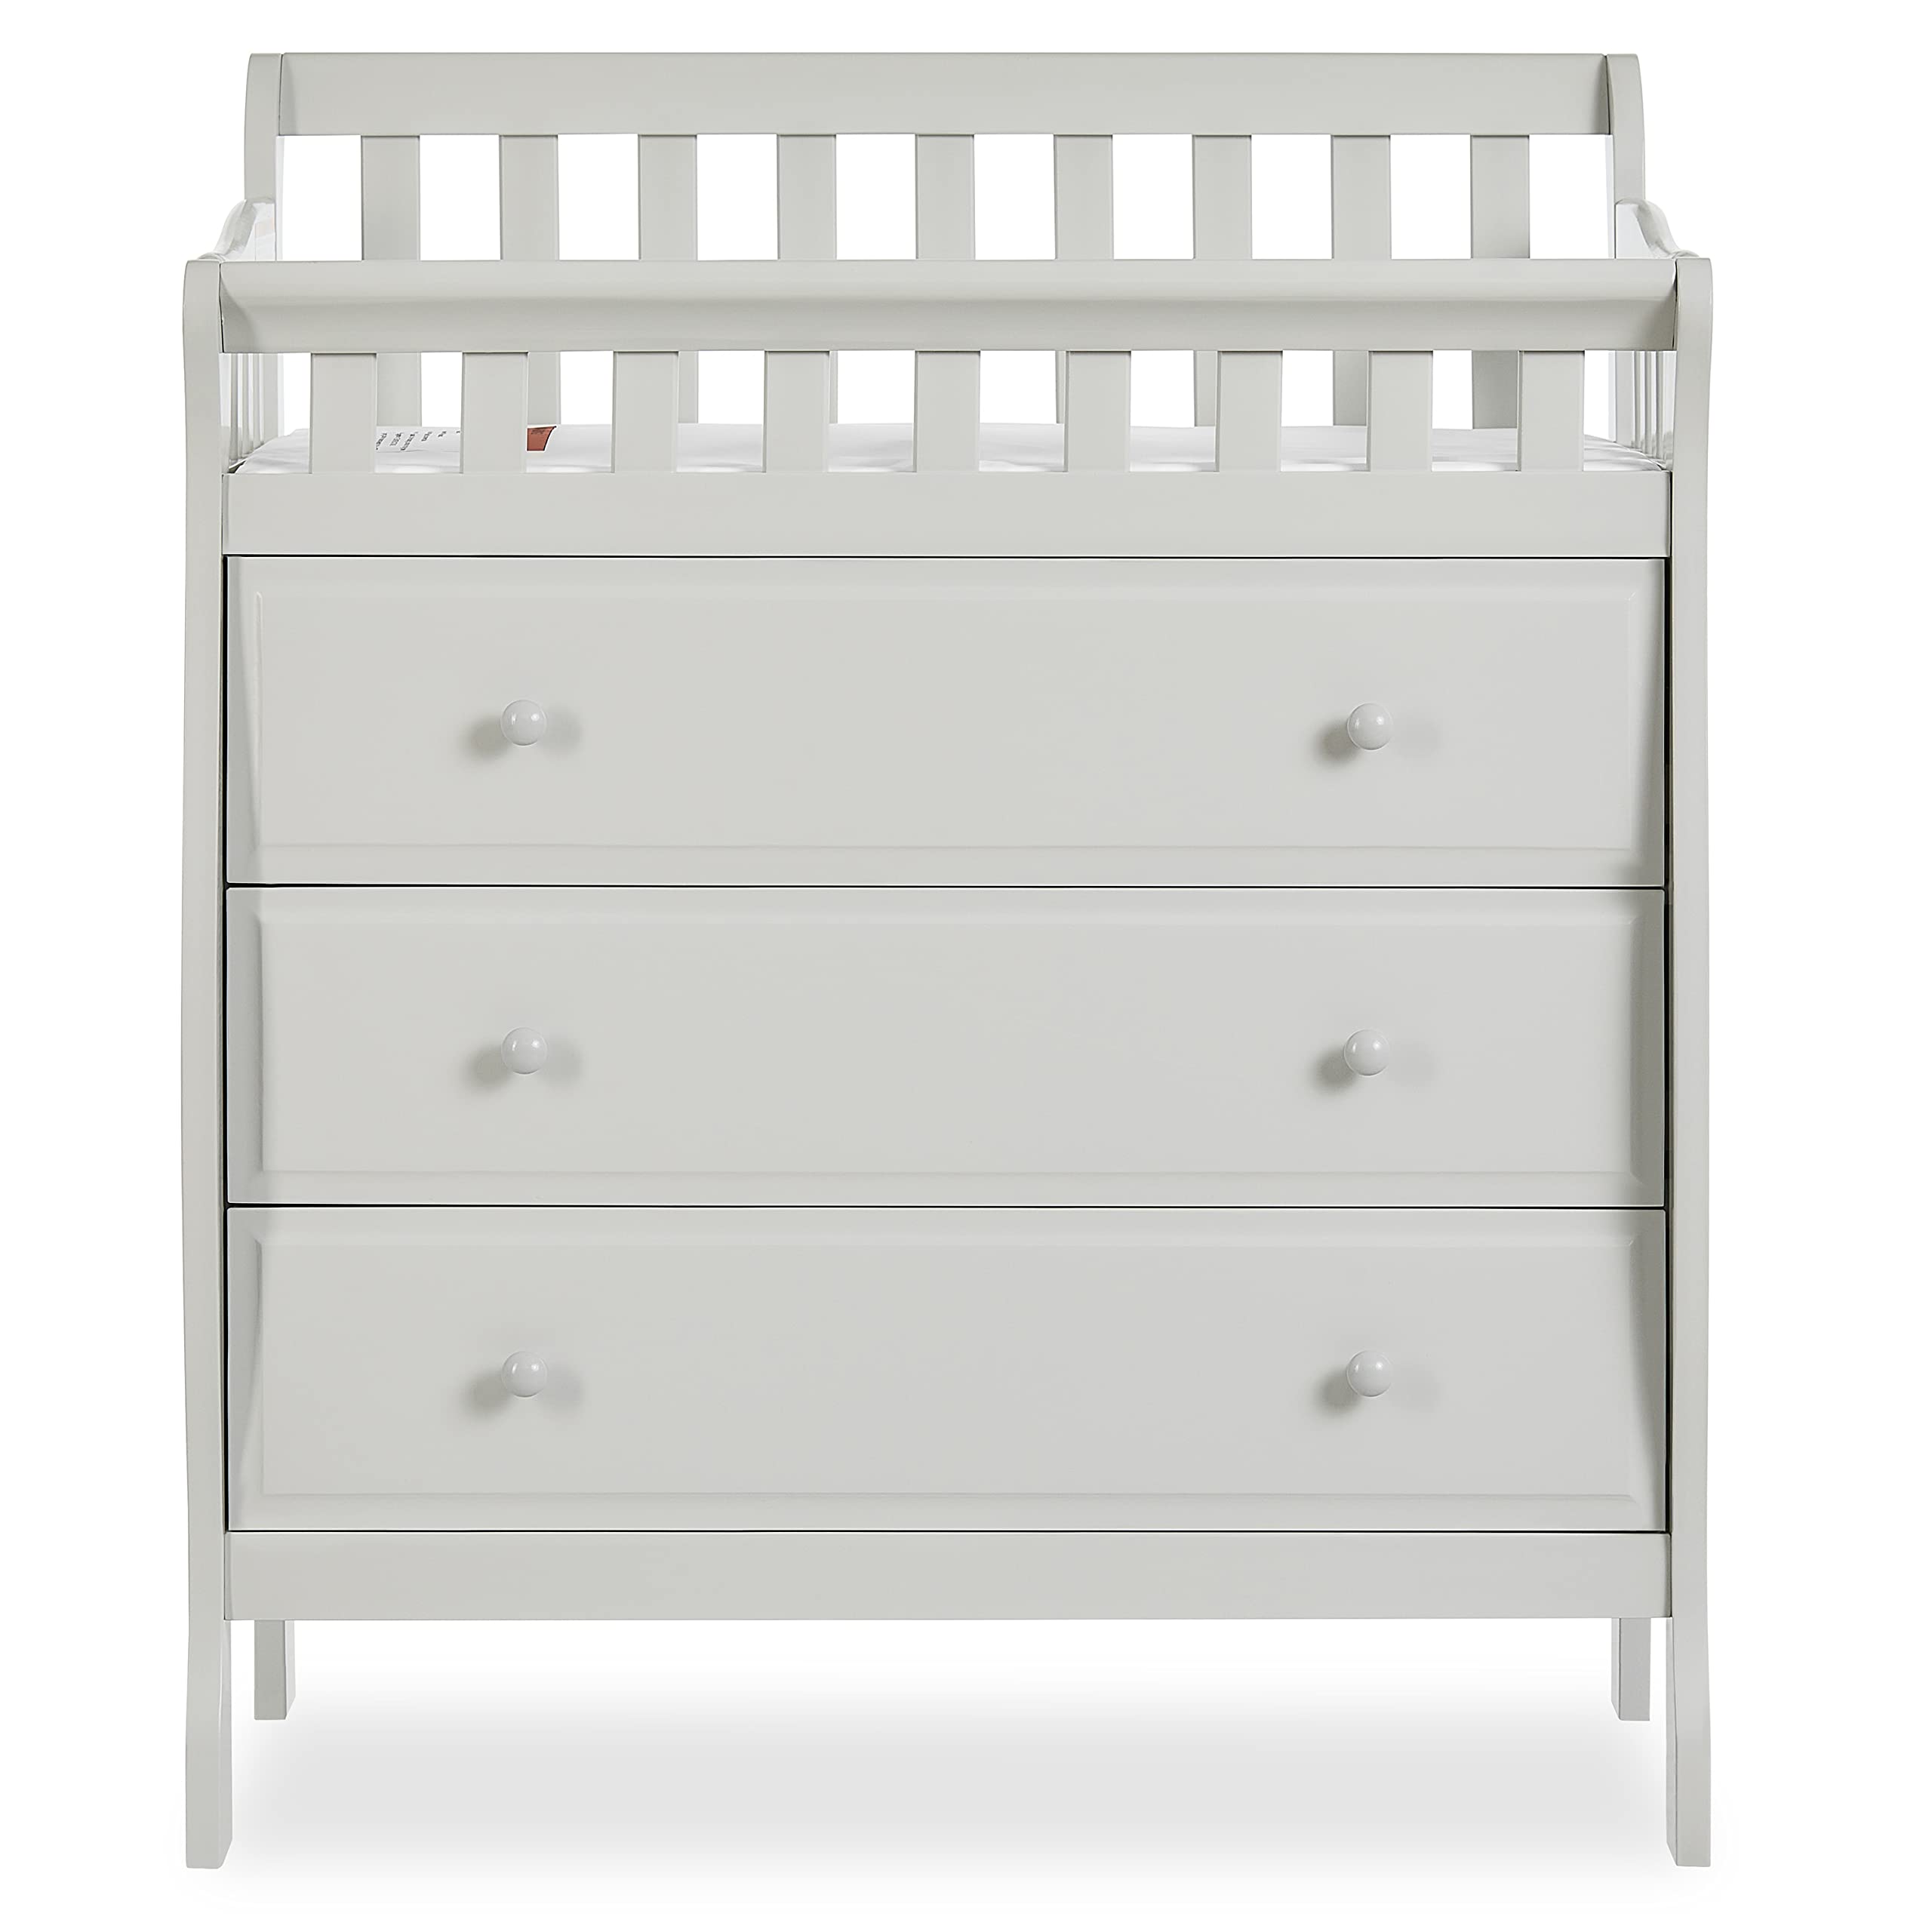 Dream On Me Marcus Changing Table And Dresser In Grey, Features Three Spacious Drawers, Non-Toxic Finishes, Comes With 1